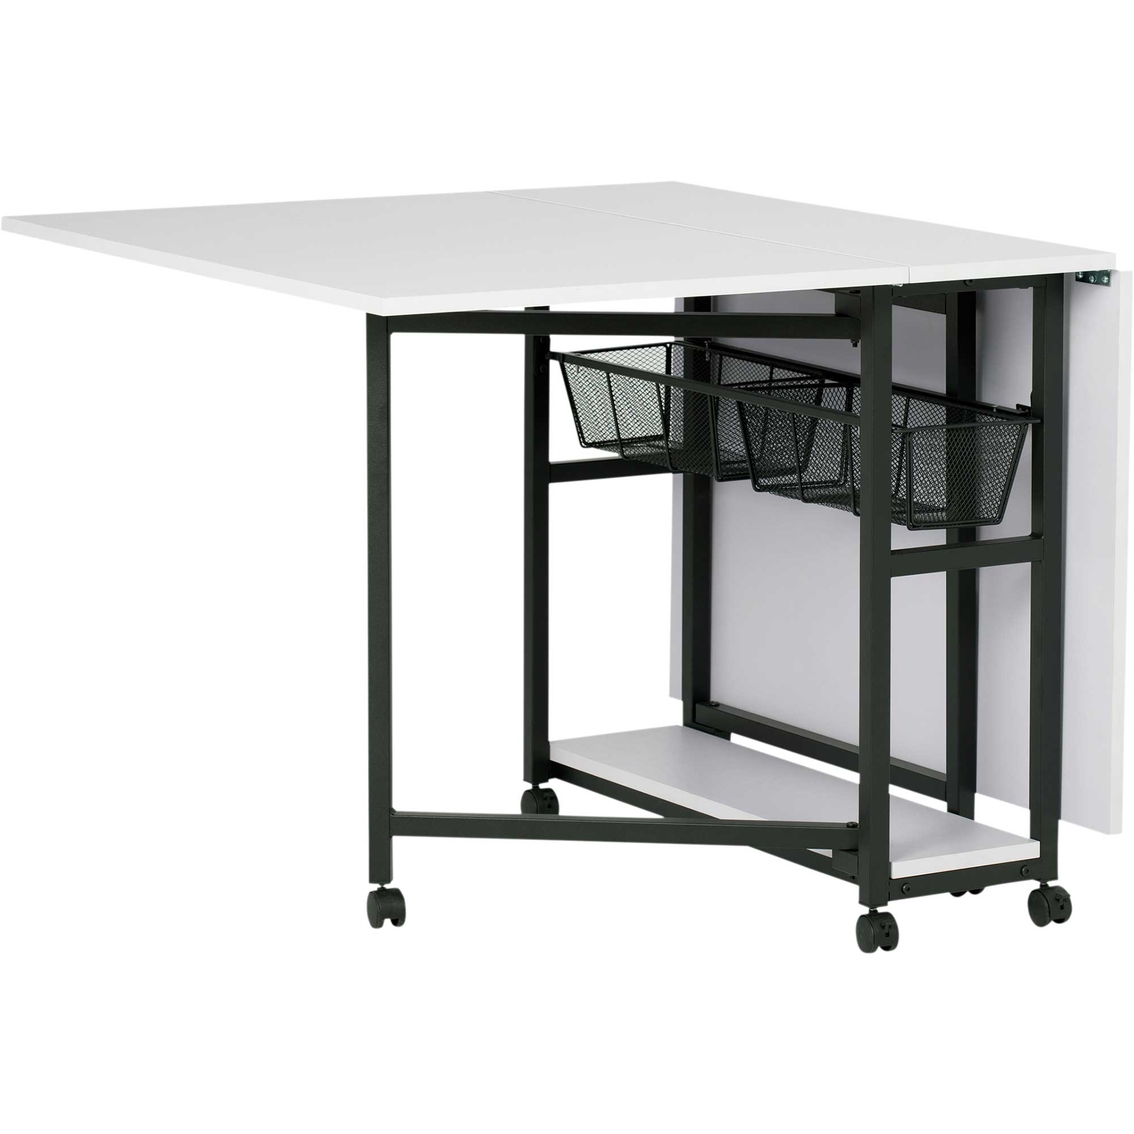 Studio Designs Home Mobile Fabric Cutting Table with Storage - Image 7 of 10